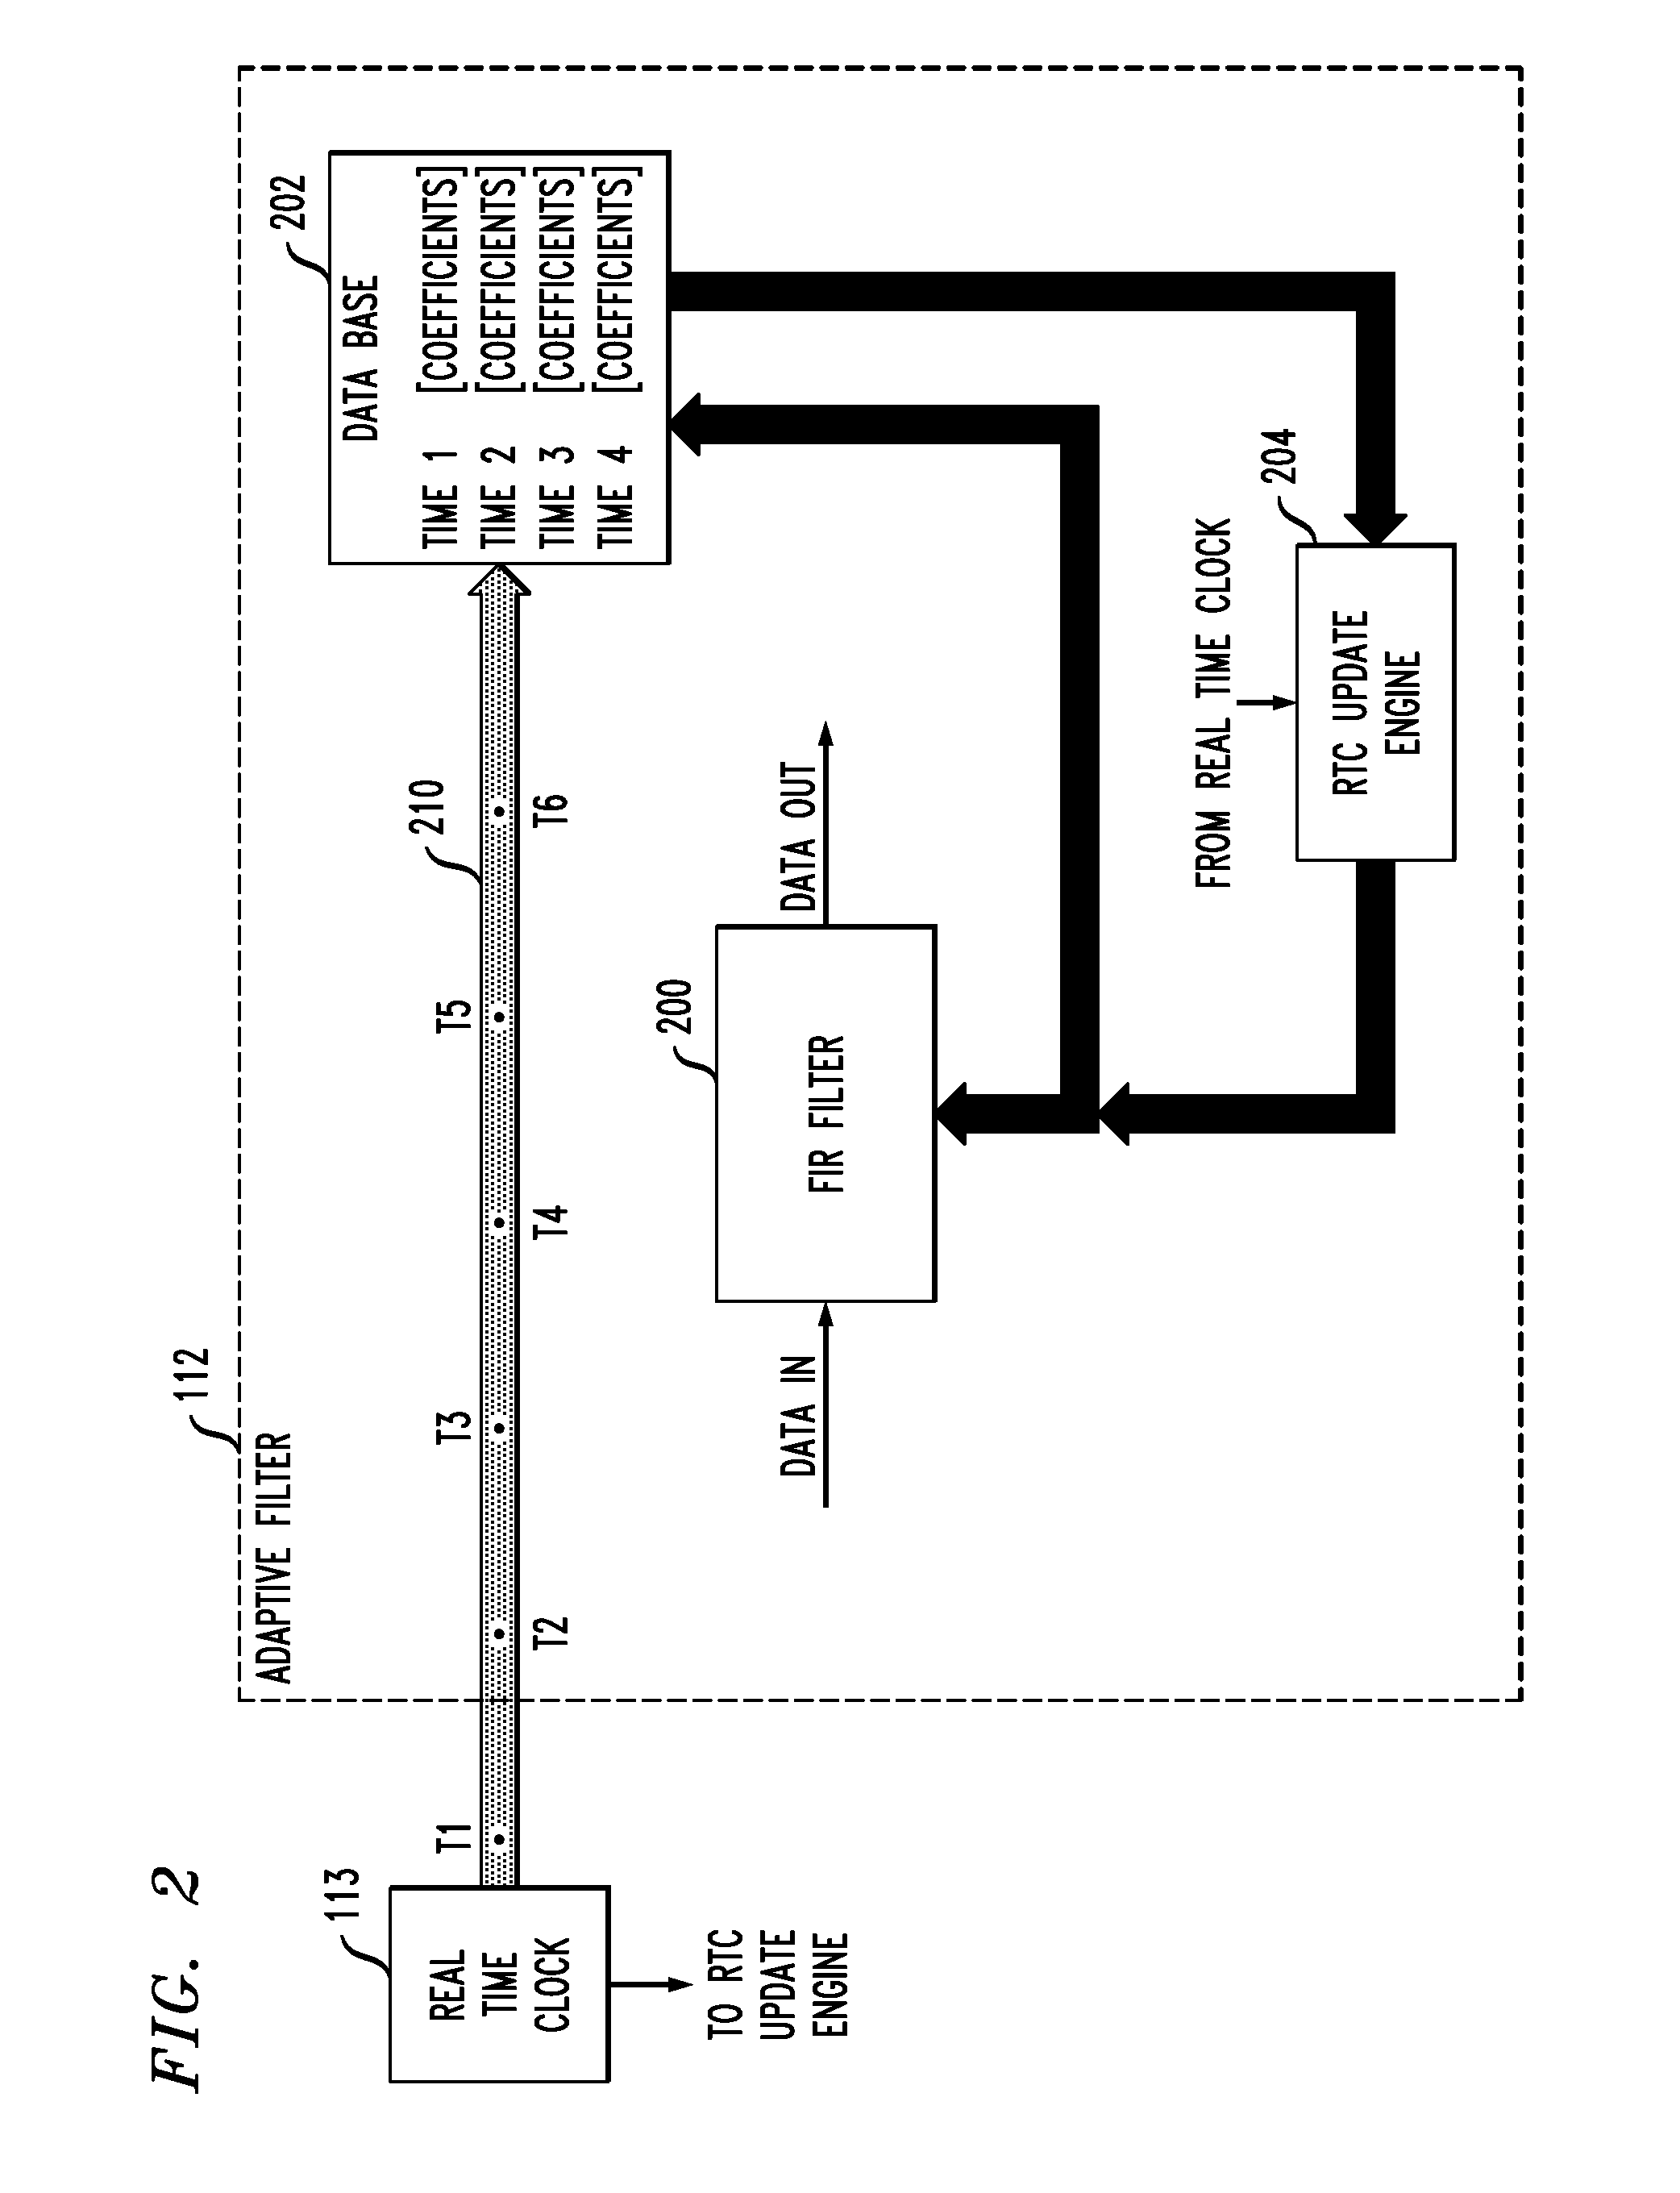 Adaptive filter with coefficient determination based on output of real time clock